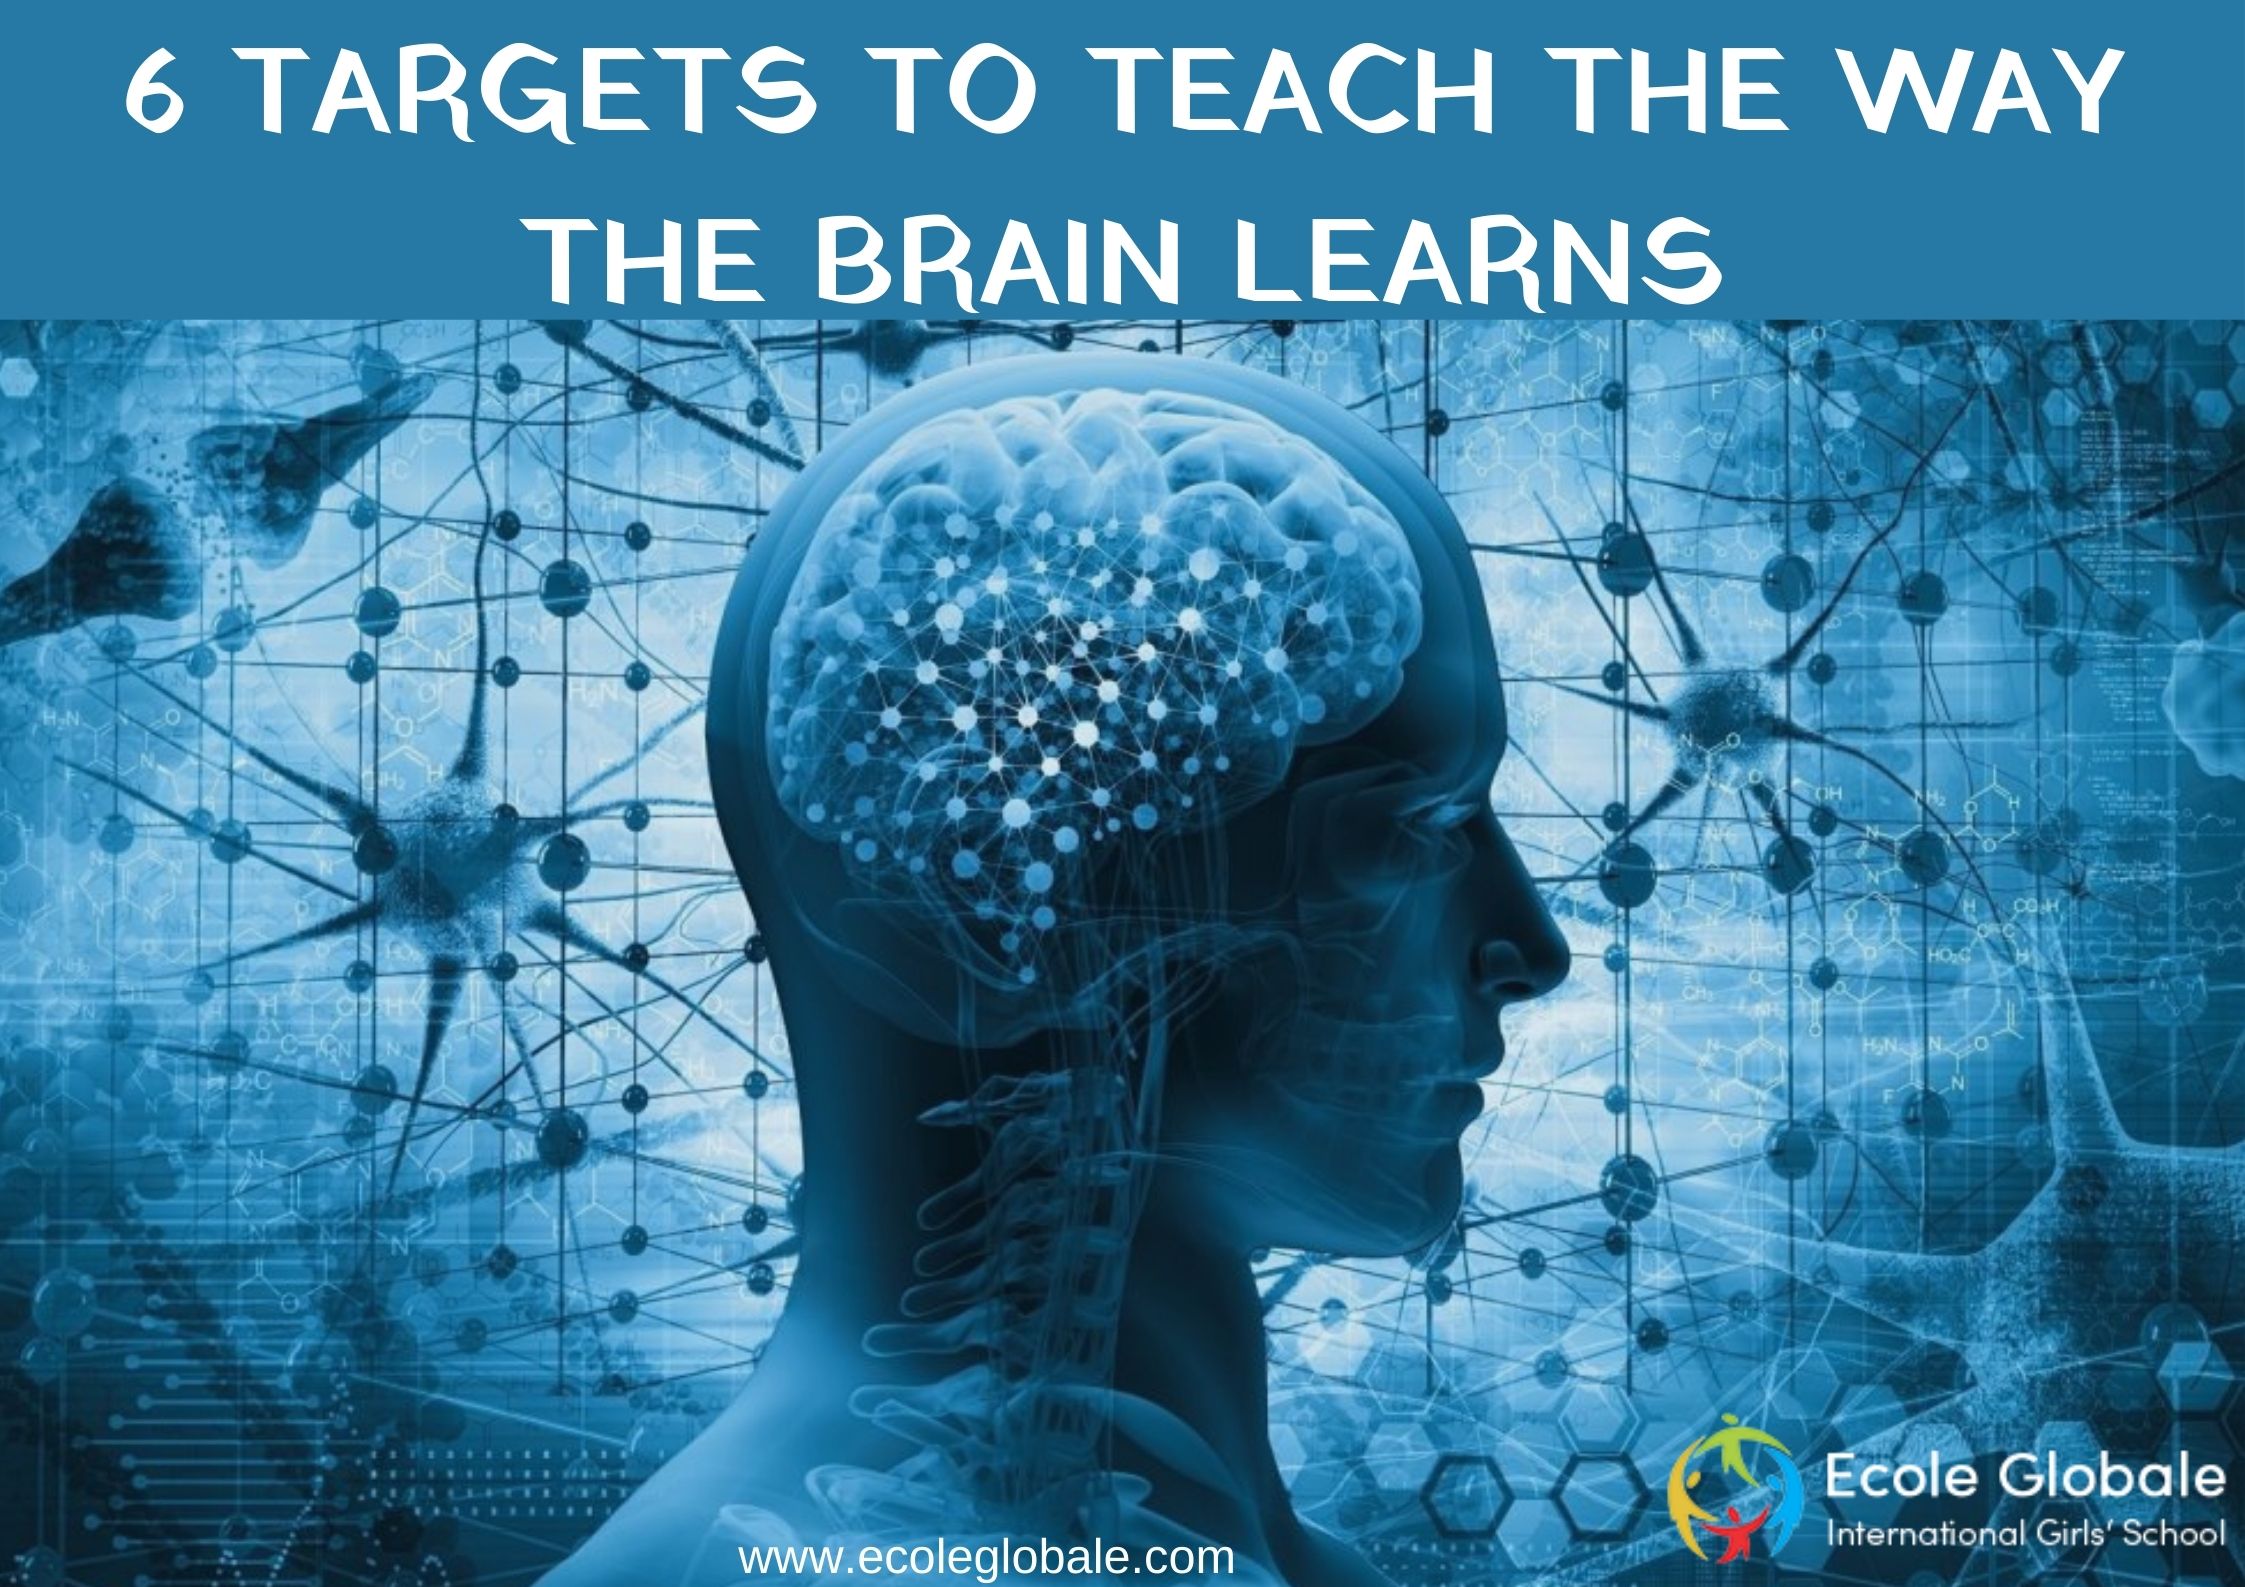 6 TARGETS TO TEACH THE WAY THE BRAIN LEARNS